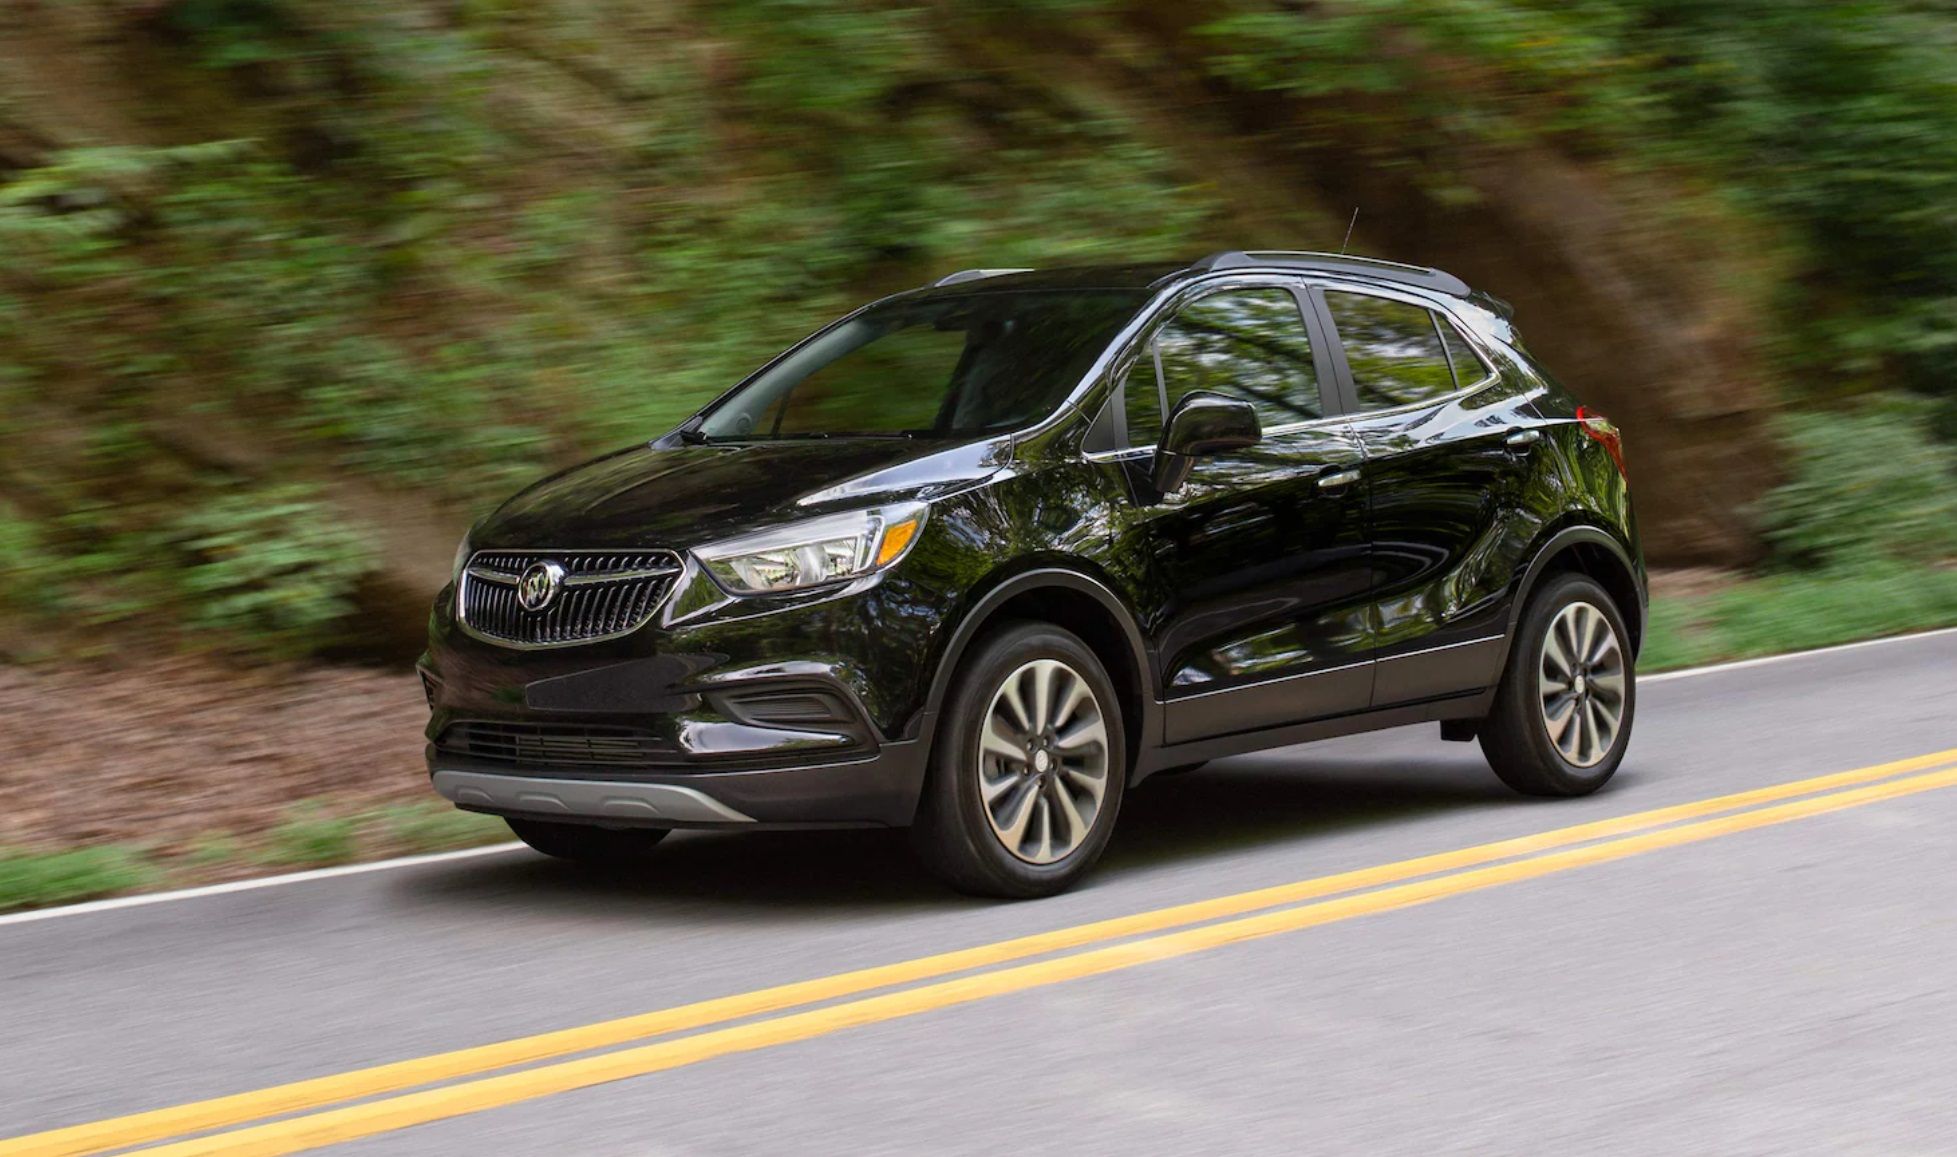 The 2021 Buick Encore speeding up on the road.